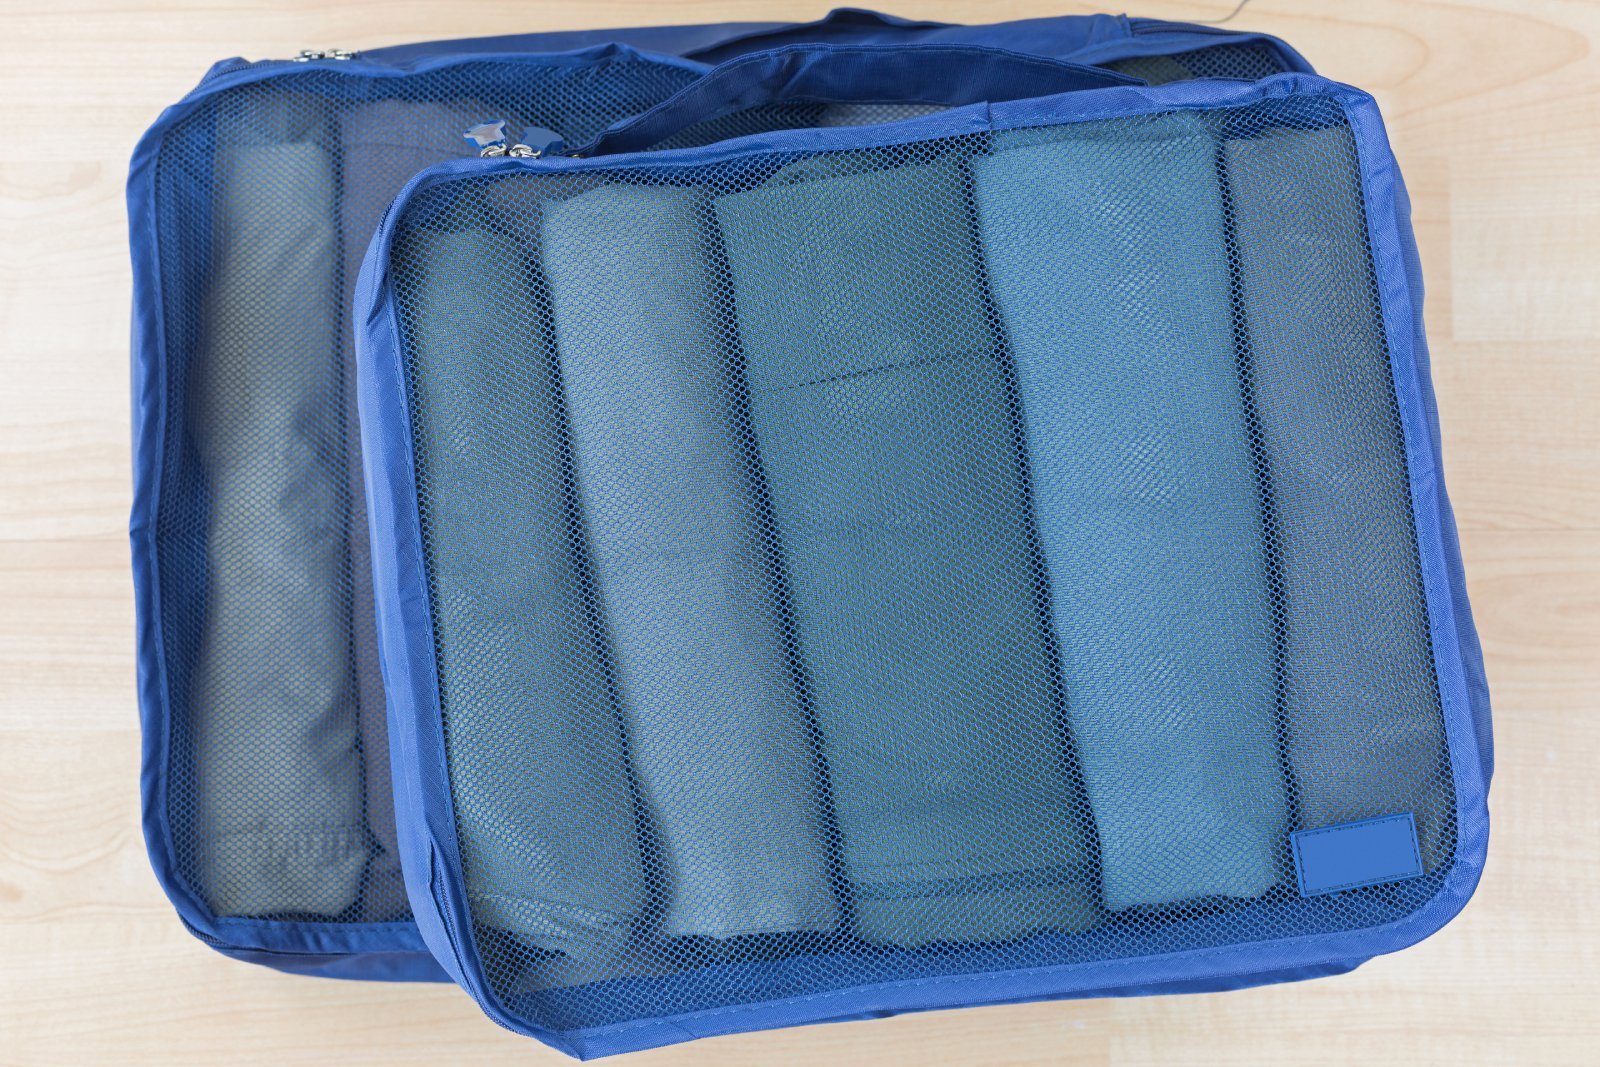 <p class="wp-caption-text">Image Credit: Shutterstock / sasimoto</p>  <p>Packing cubes are the ultimate suitcase organizers. They compartmentalize your clothes, making it easy to keep similar items together and access everything quickly without disrupting the entire arrangement.</p>